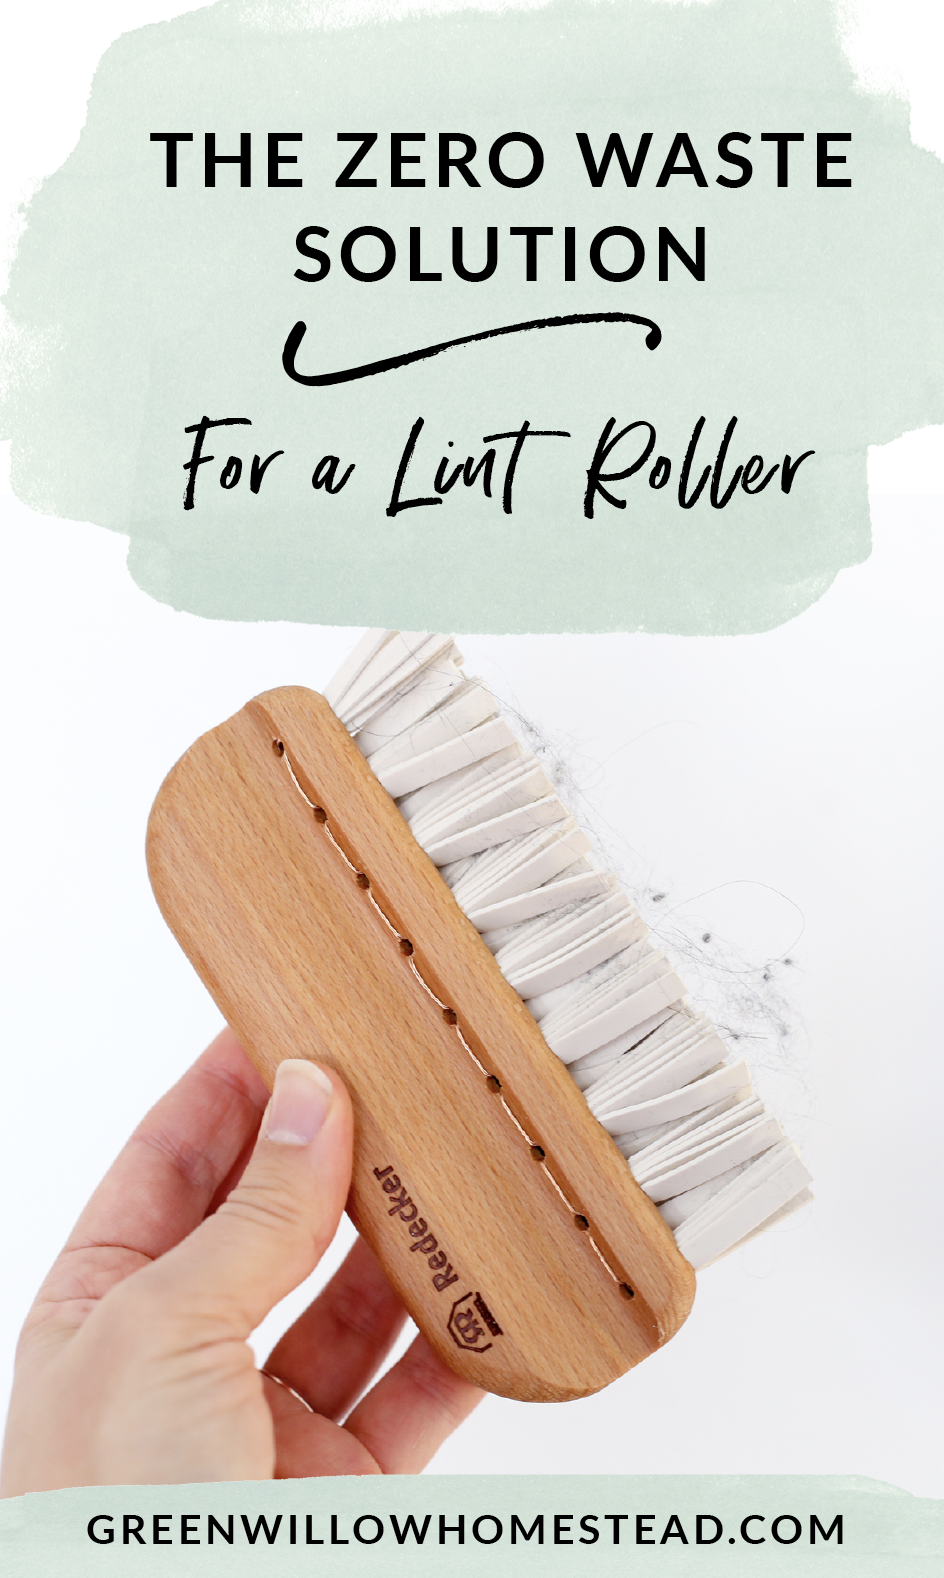 The zero waste solution for a lint roller, sustainable swap for keeping pet hair off your clothes